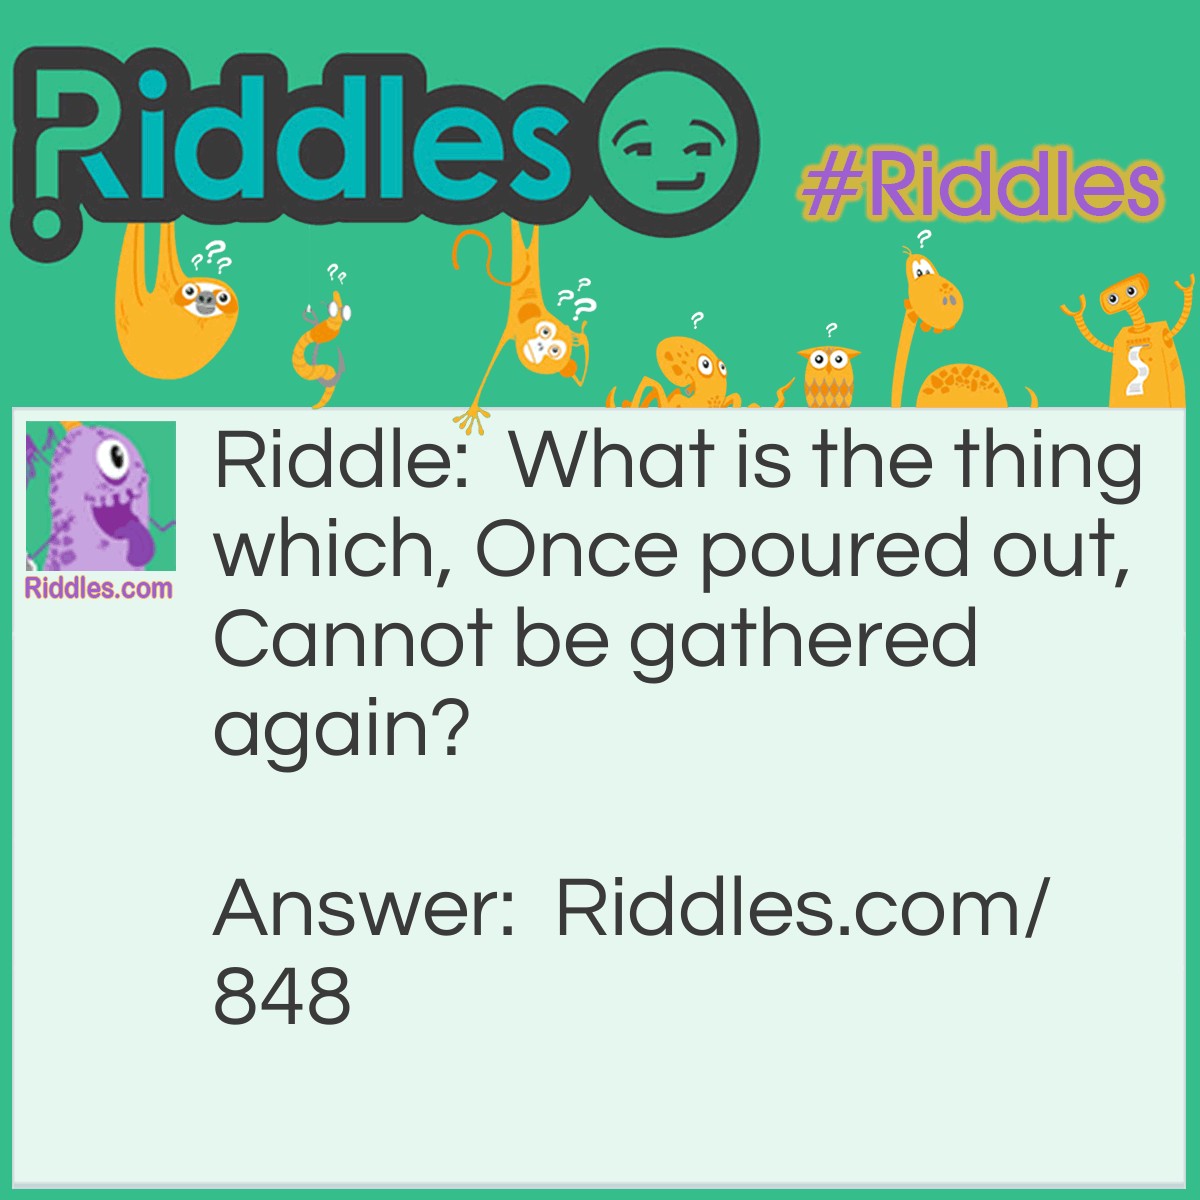 Riddle: What is the thing which, Once poured out, Cannot be gathered again? Answer: Rain, or rainfall.